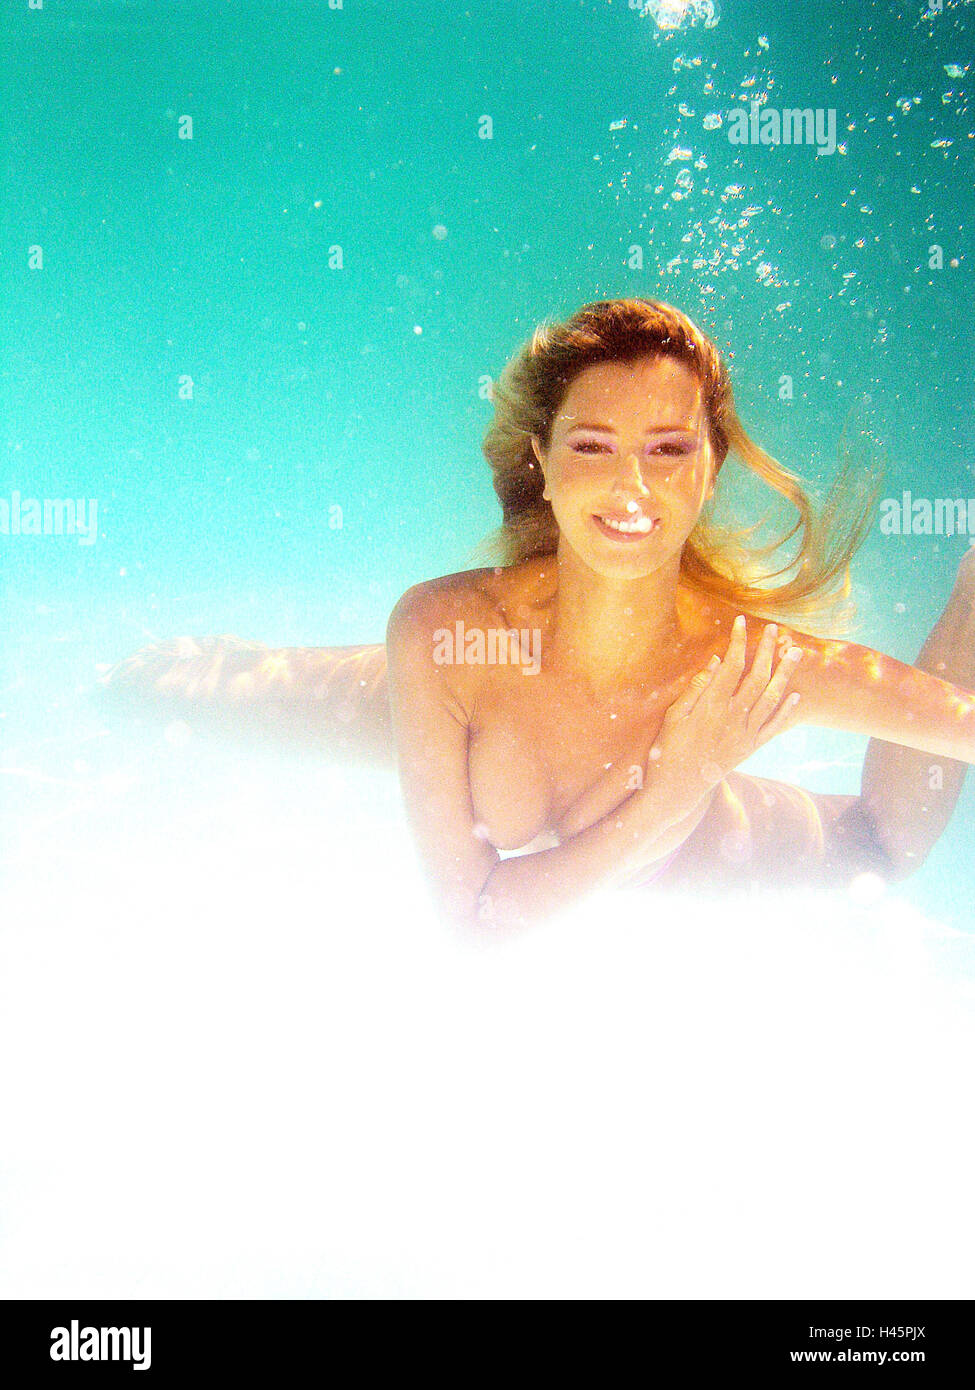 Woman, young, upper bodies freely, dives,  Pool, underwater reception,   Series, 27 years, 20-30 years, blond, long-haired, nicely, attractively, smiling, gaze camera, breasts cover, swims, swims, under water, pools, Swimmingpool, sunny, summer, air bubbles, concept, mermaid, water nymph, grace, beauty, pliability, dream, illusion, back light, Stock Photo